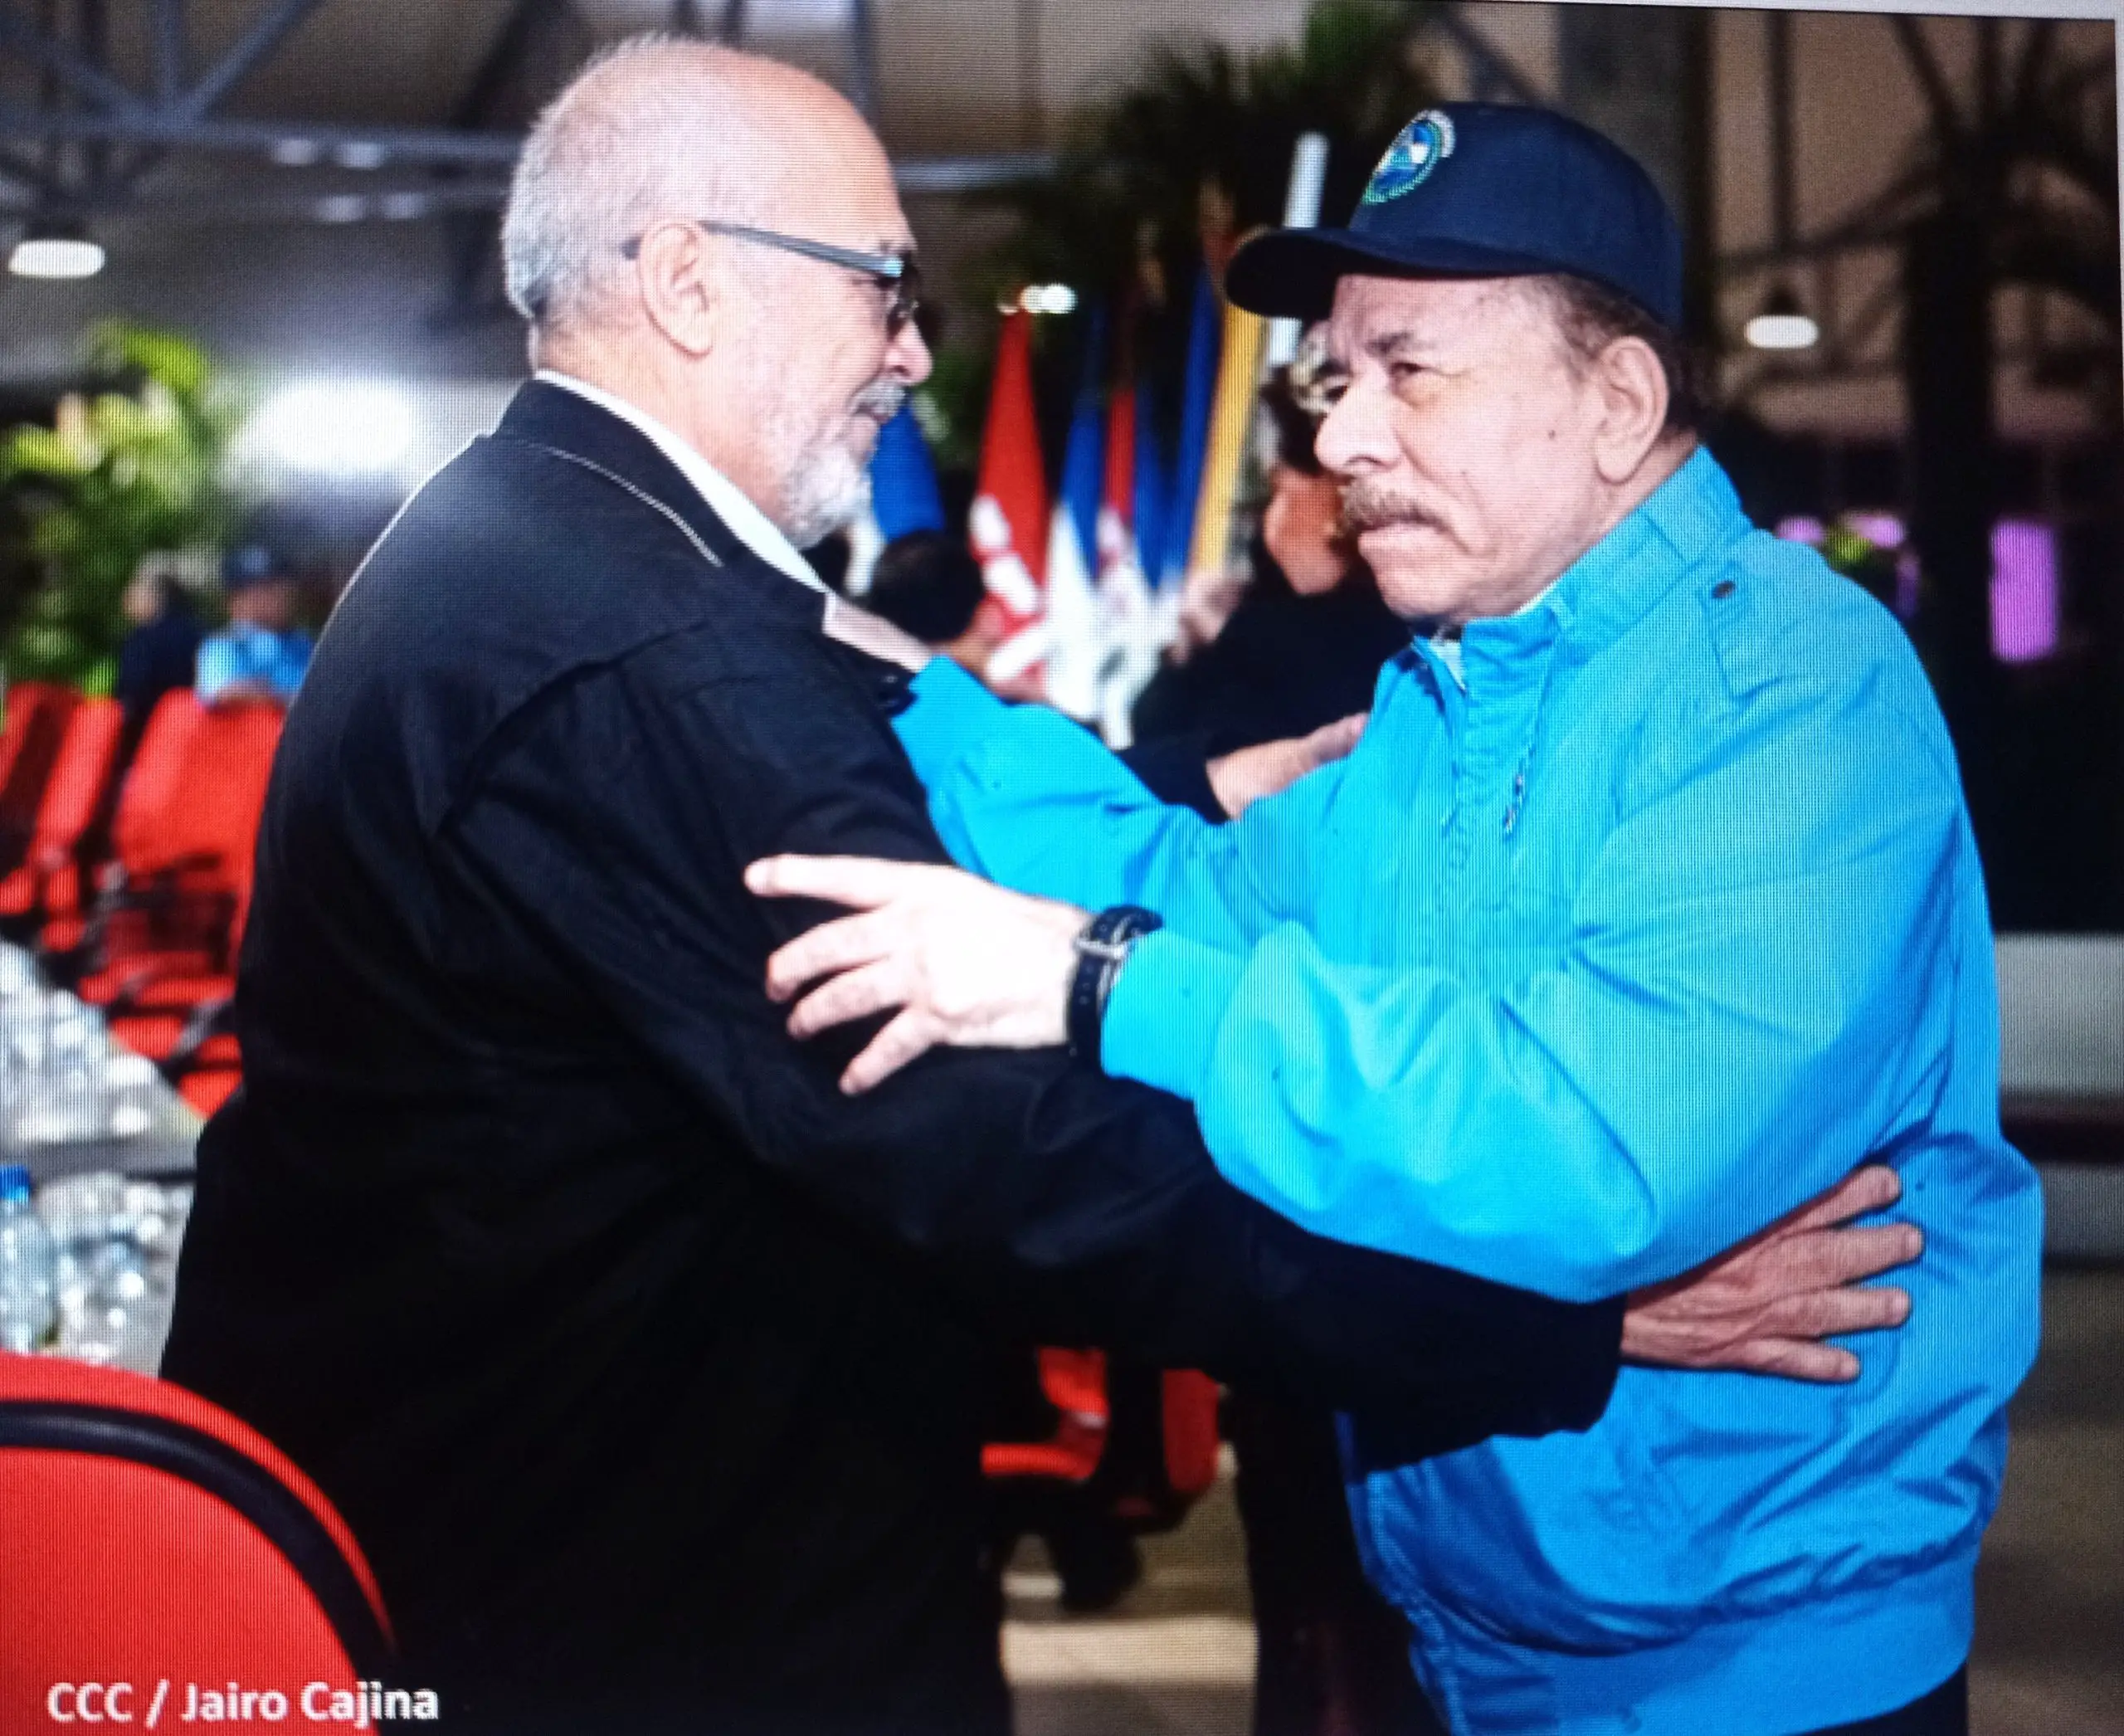 The Vice President of the Supreme Court, Marvin Aguilar García, greets the dictator Daniel Ortega